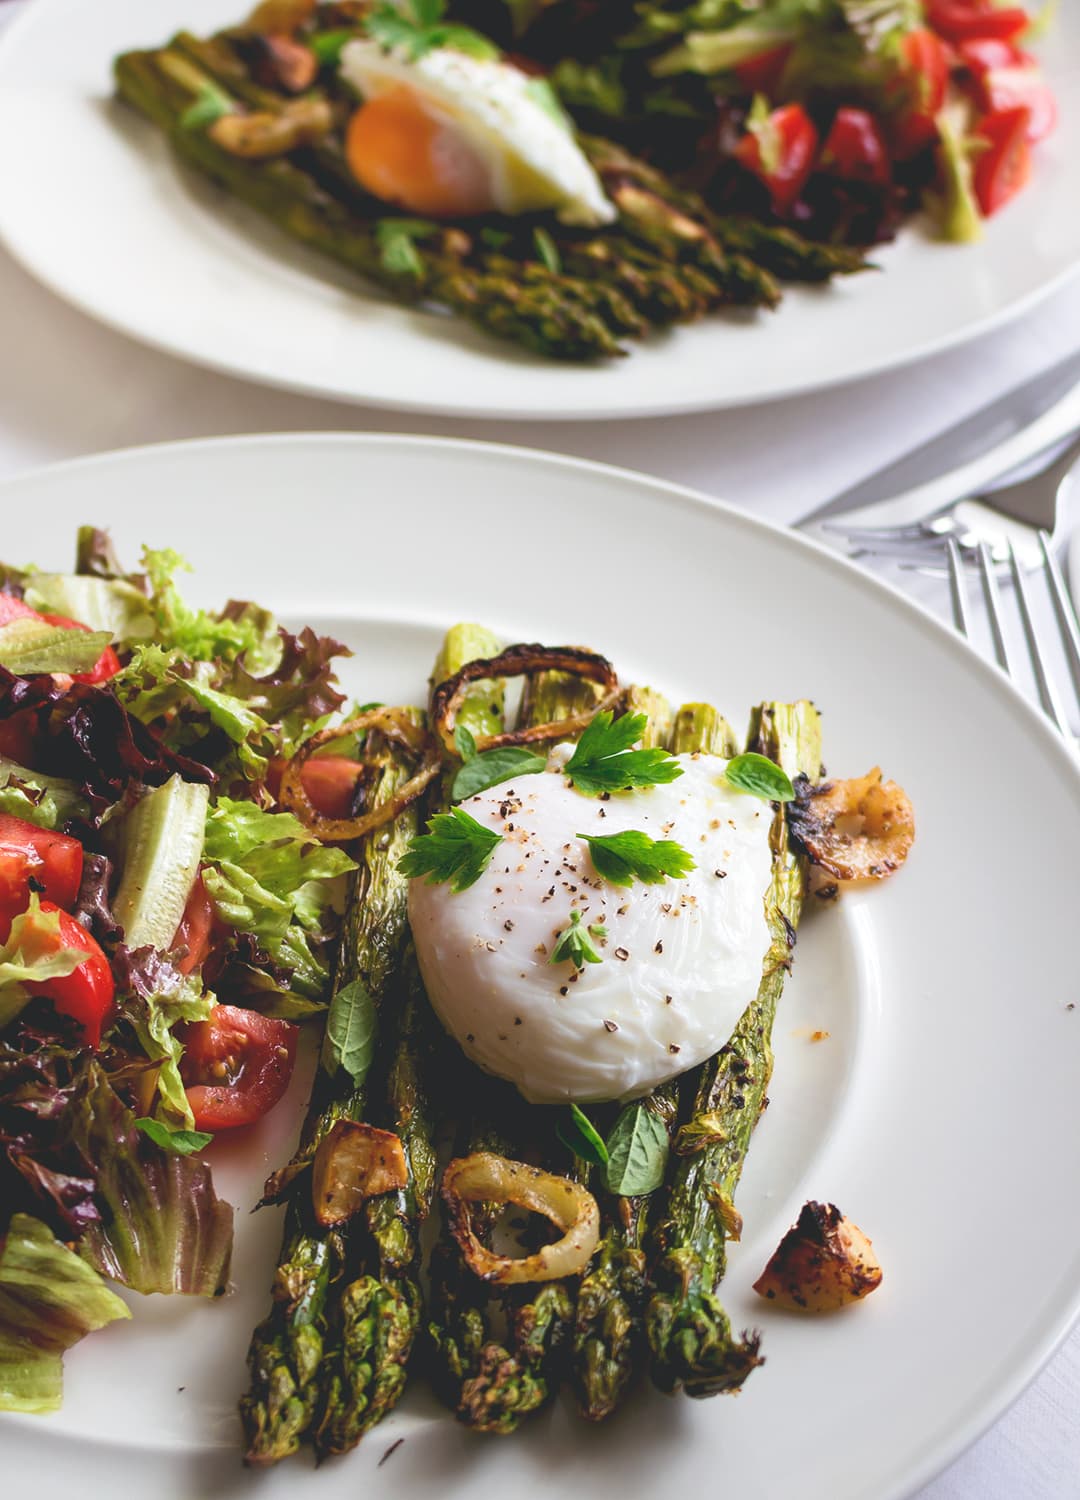 Grilled Asparagus with Poached Egg and Greens - delicious savory breakfast or bruch when you're craving something fancier. Healthy and actually really easy to make! We love this recipe! | thehealthfulideas.com